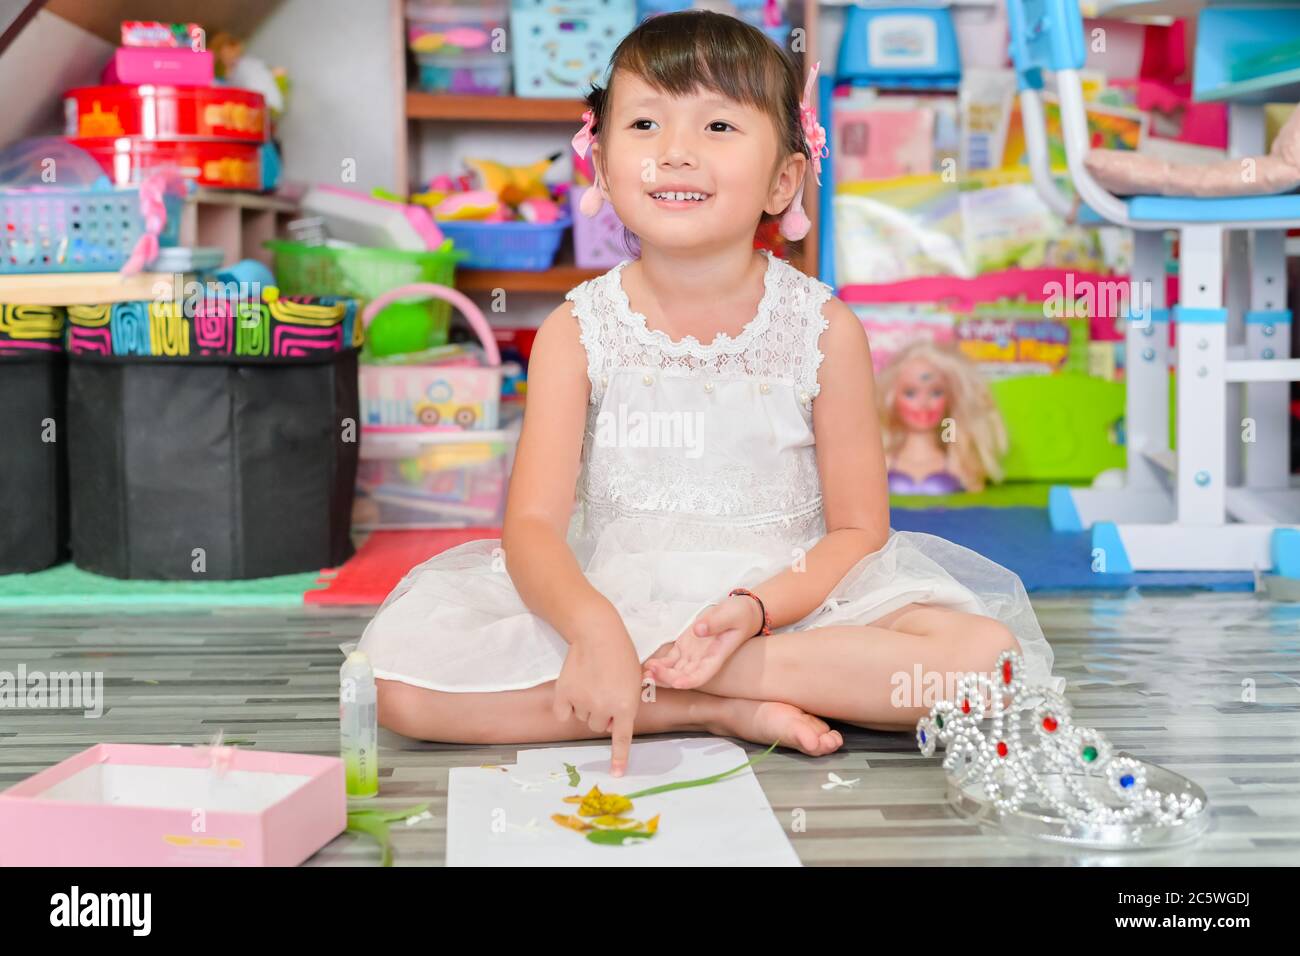 Child little girl play toys disorderly mess in living room a dirty or untidy state of toy and doll at home Stock Photo